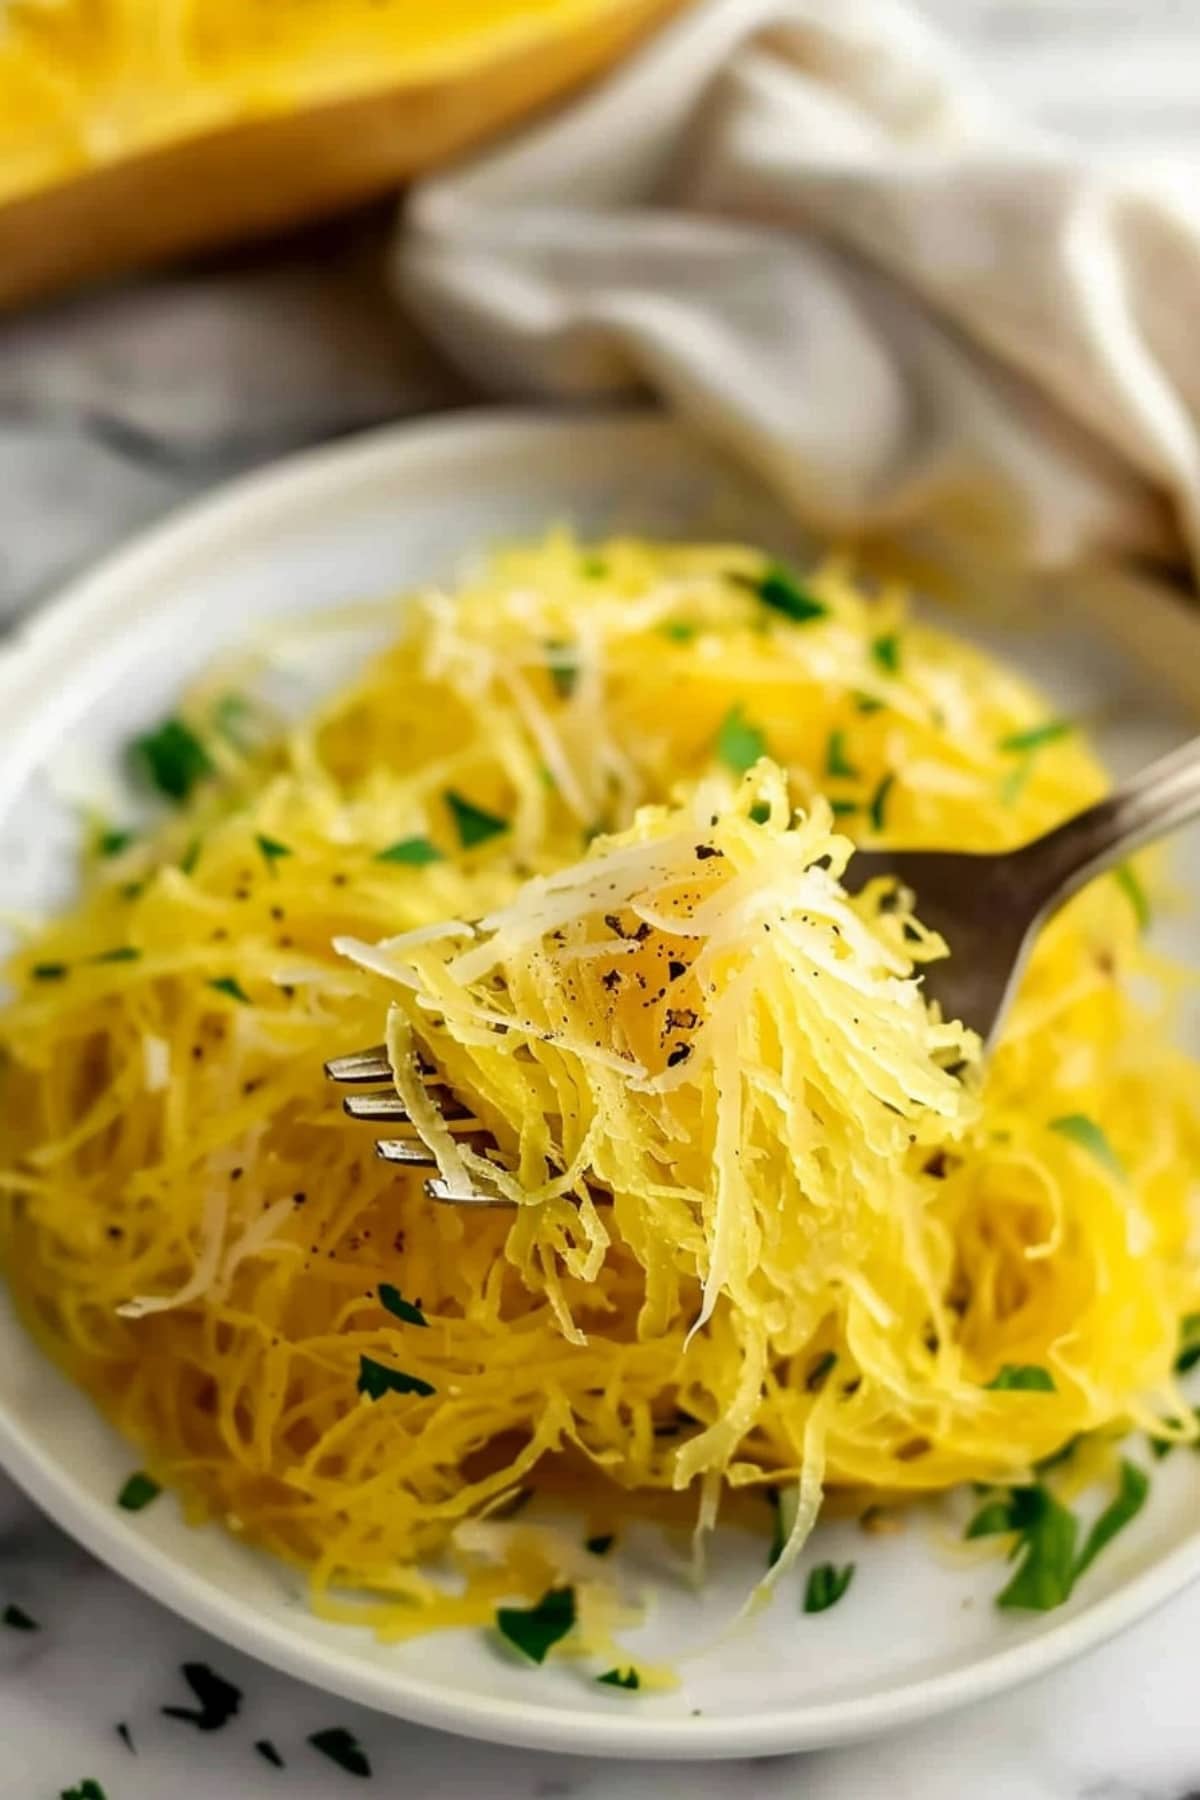 Shredded air fried spaghetti squash in for served on a white plate.